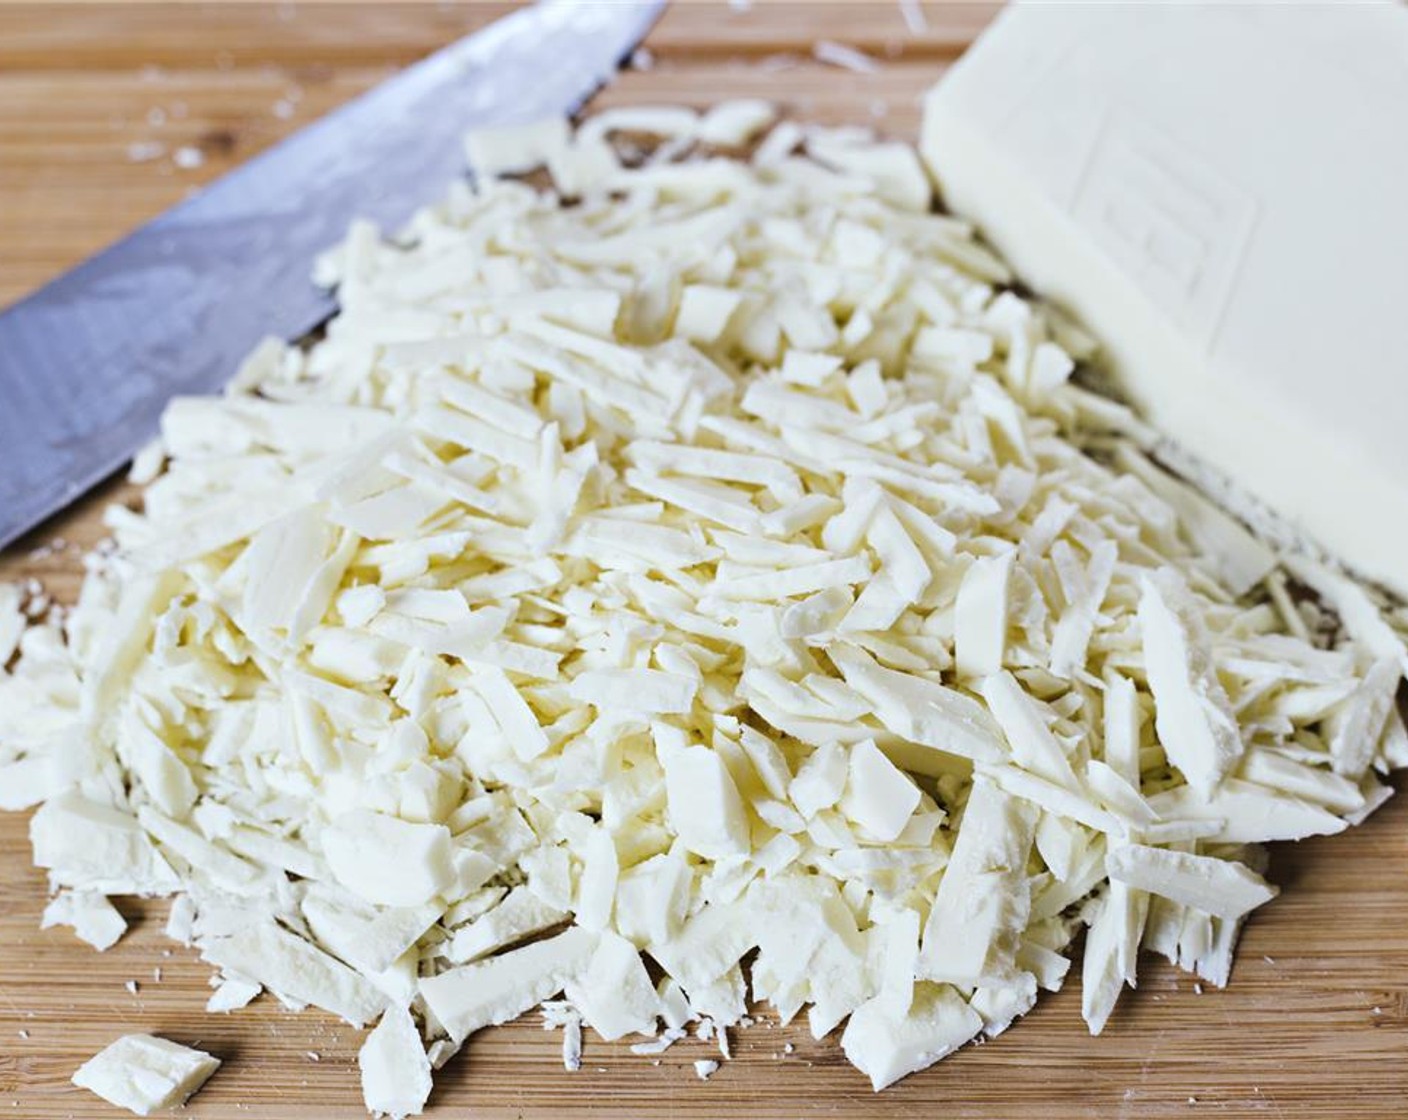 step 1 Finely chop the White Chocolate (1 1/2 cups).